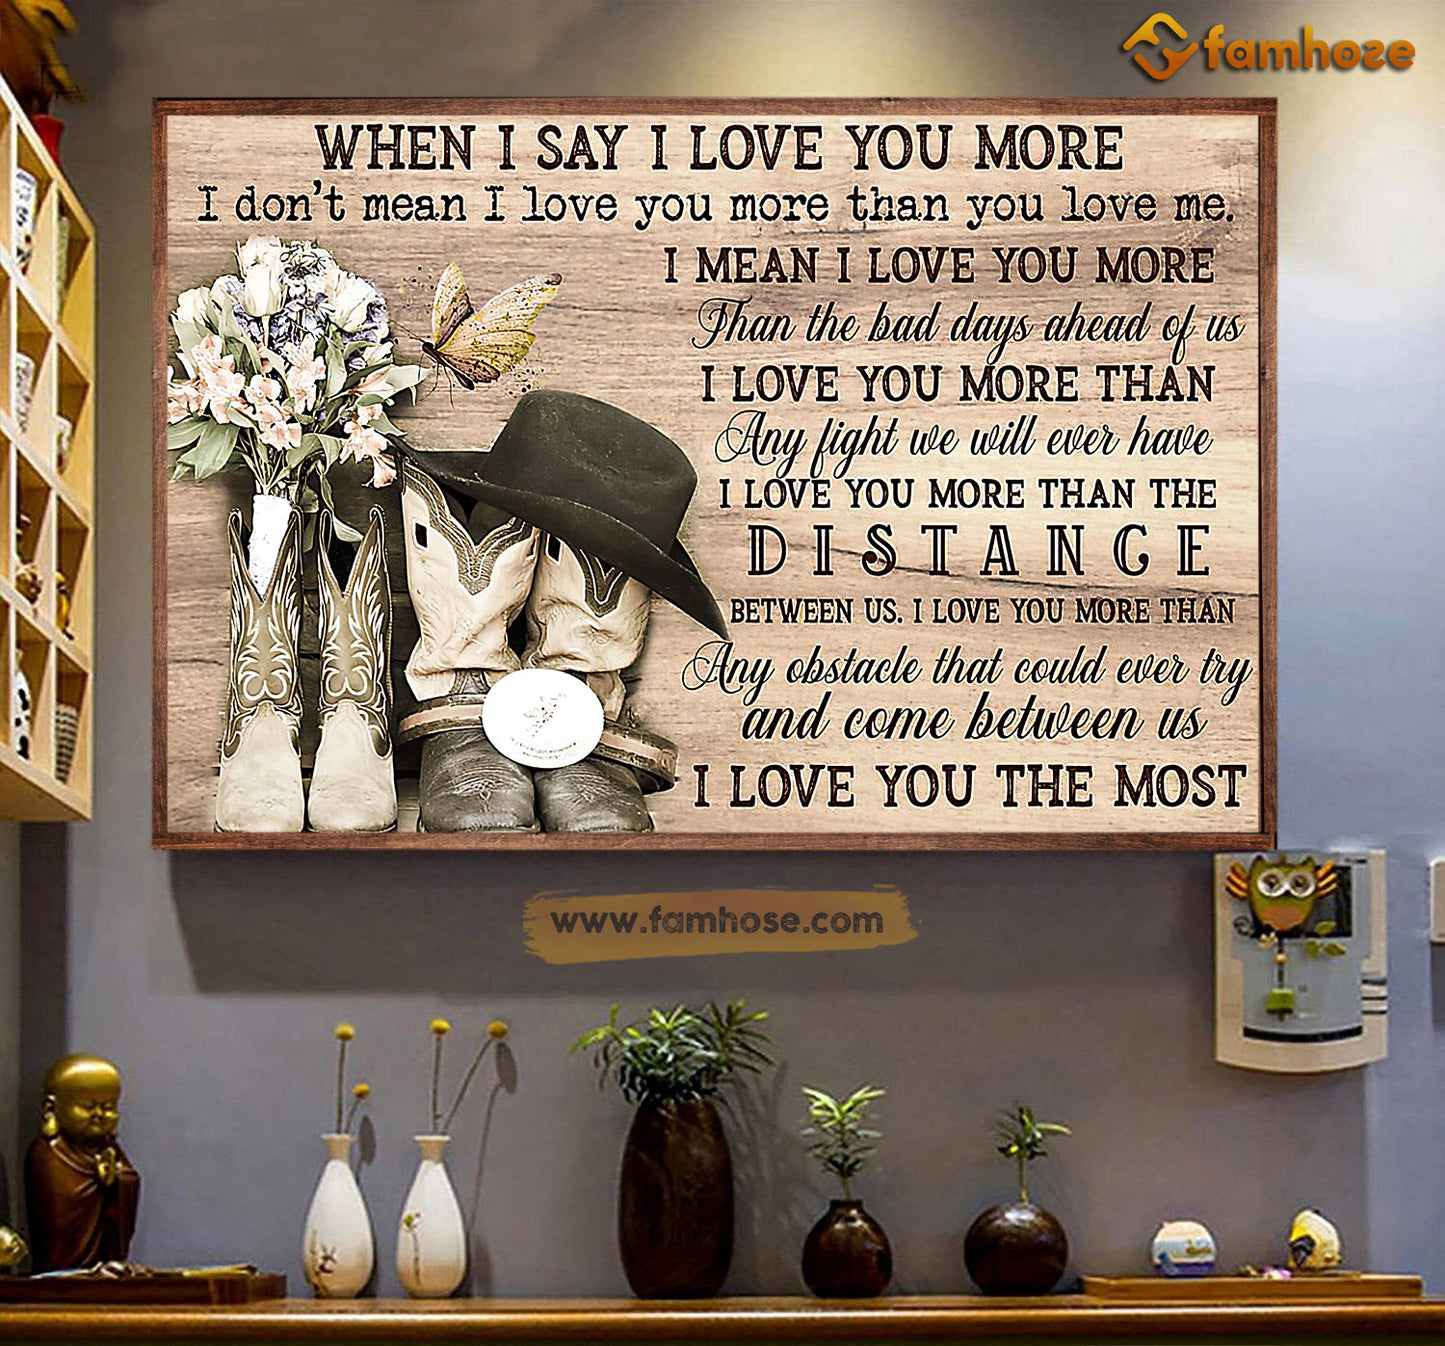 Valentine's Day Cowboy Poster/Canvas, When I Say I Love You More Than Tha Bad Days Ahead Of Us, Rodeo Canvas Wall Art, Poster Gift For Rodeo Lovers